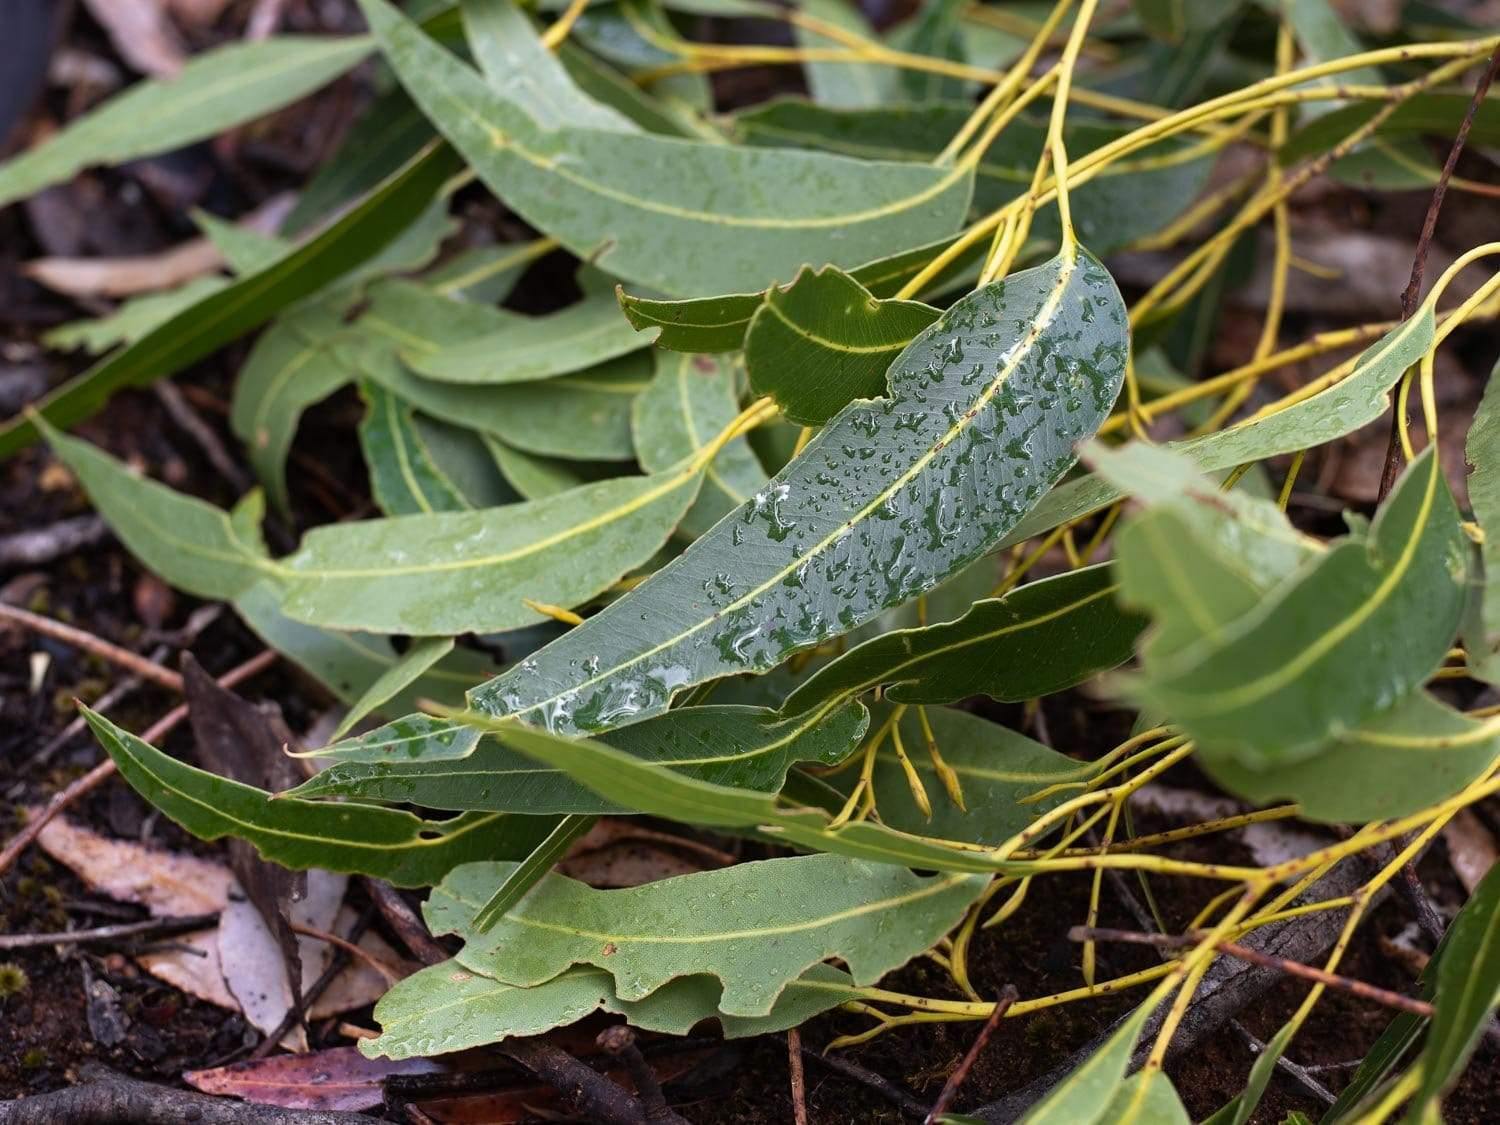 Close-up view of a bunch of green leaves on the ground, Leaf Litter #3 - Kangaroo Island SA